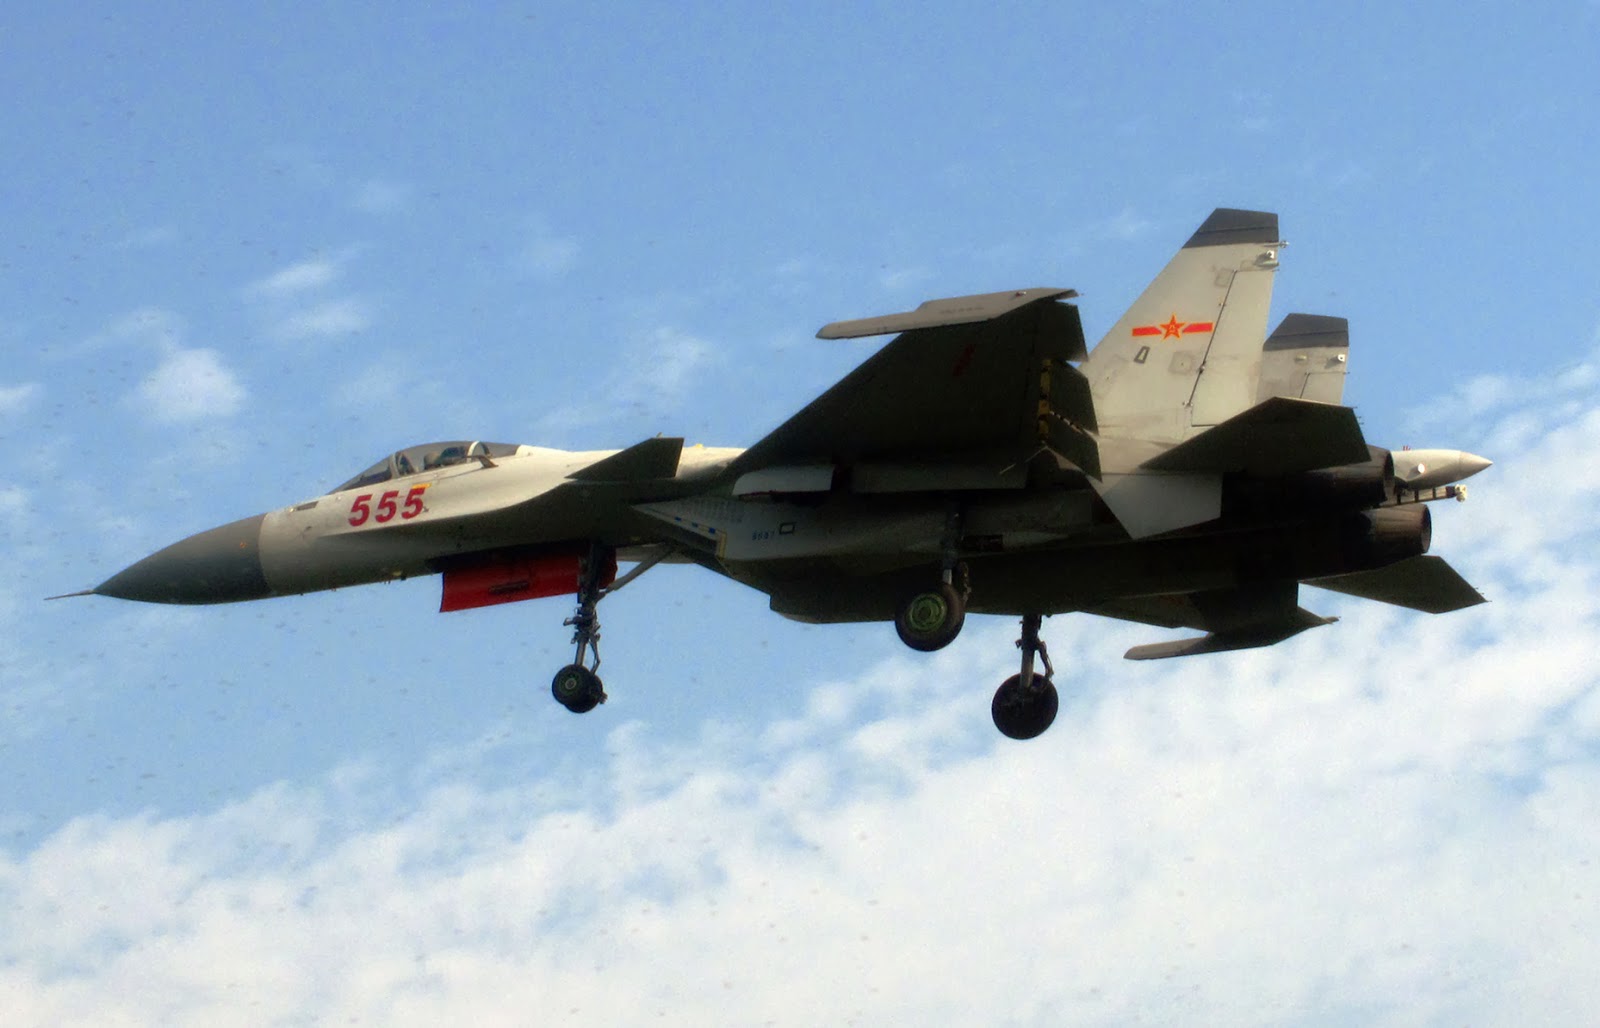 Shenyang J-15 - Página 2 China%E2%80%99s+first+carrier-borne+J15+fighter+jets+were+displayed+for+public+to+see+Wednesday+in+Xi%E2%80%99an+of+northwest+China%E2%80%99s+Shaanxi+Province+(2)